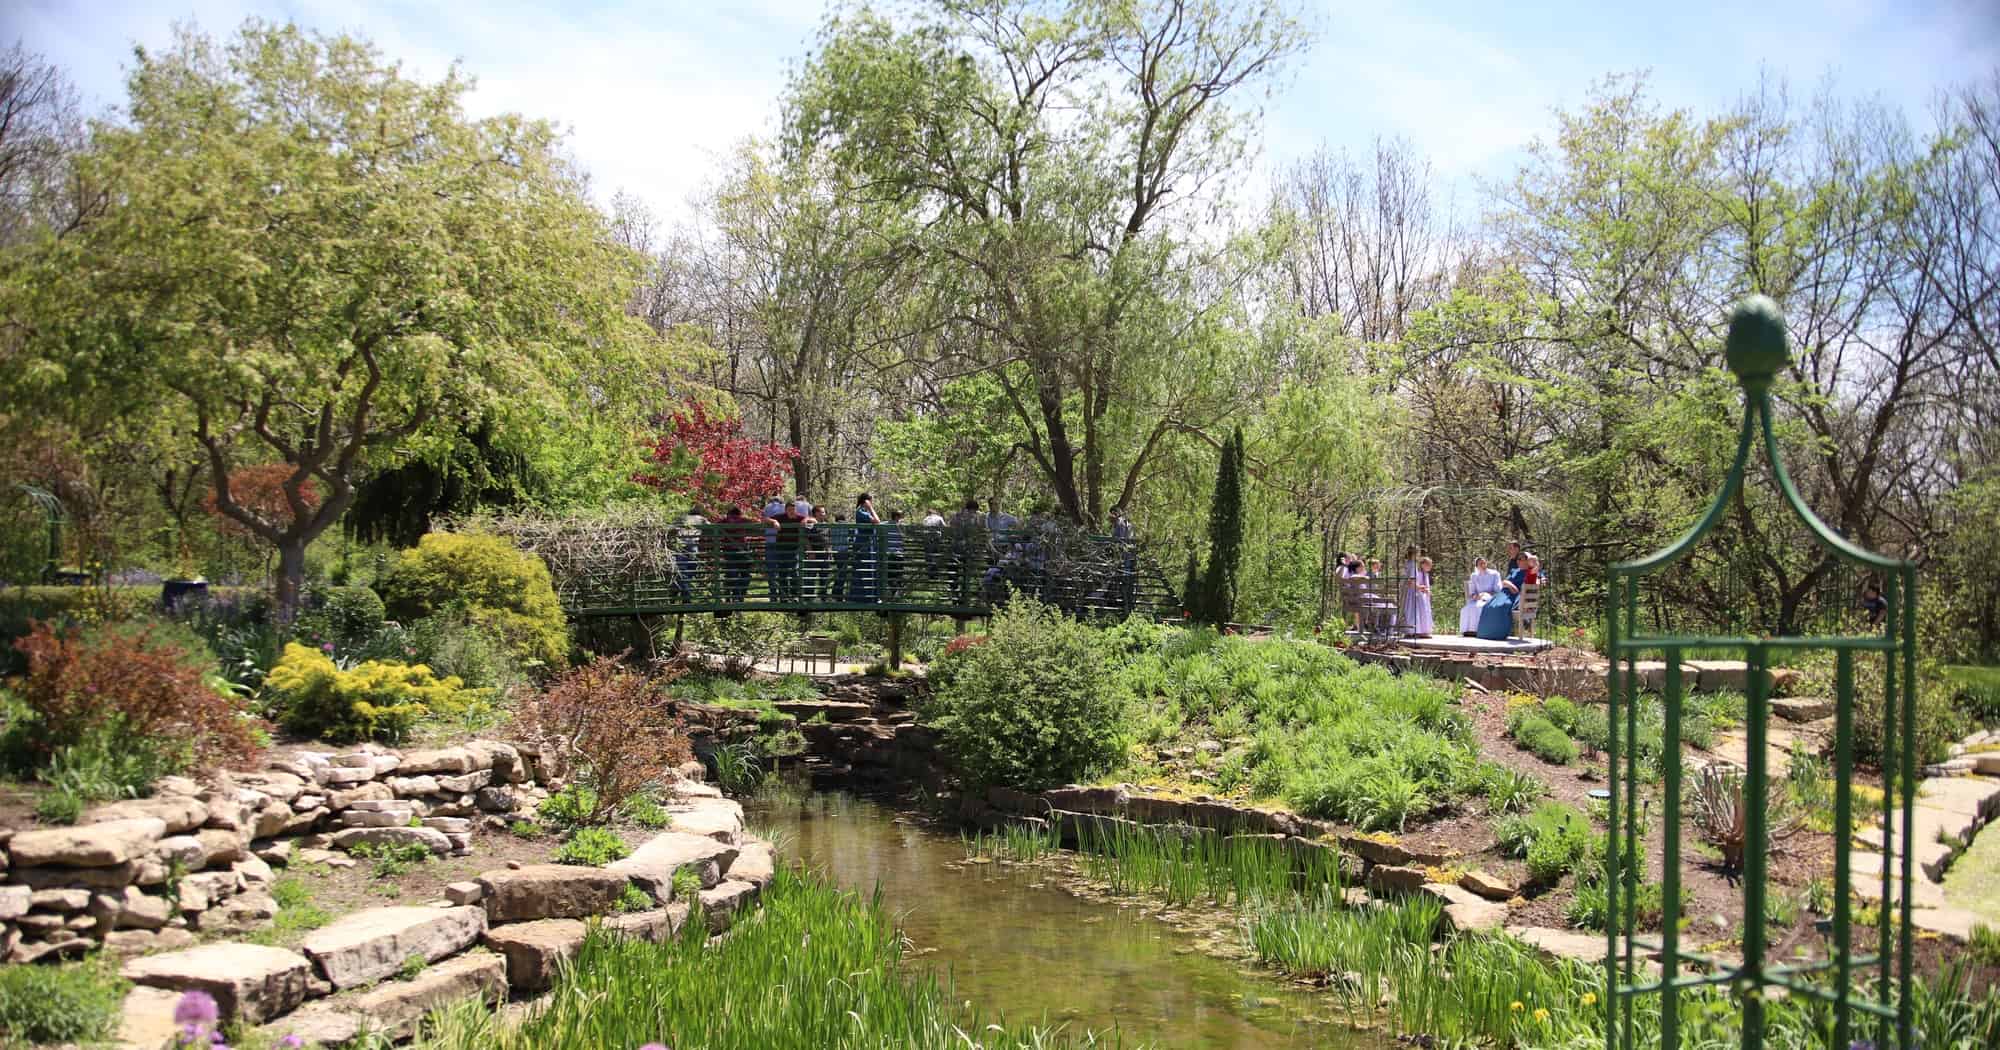 Overland Park: Events, Activities & Things to Do